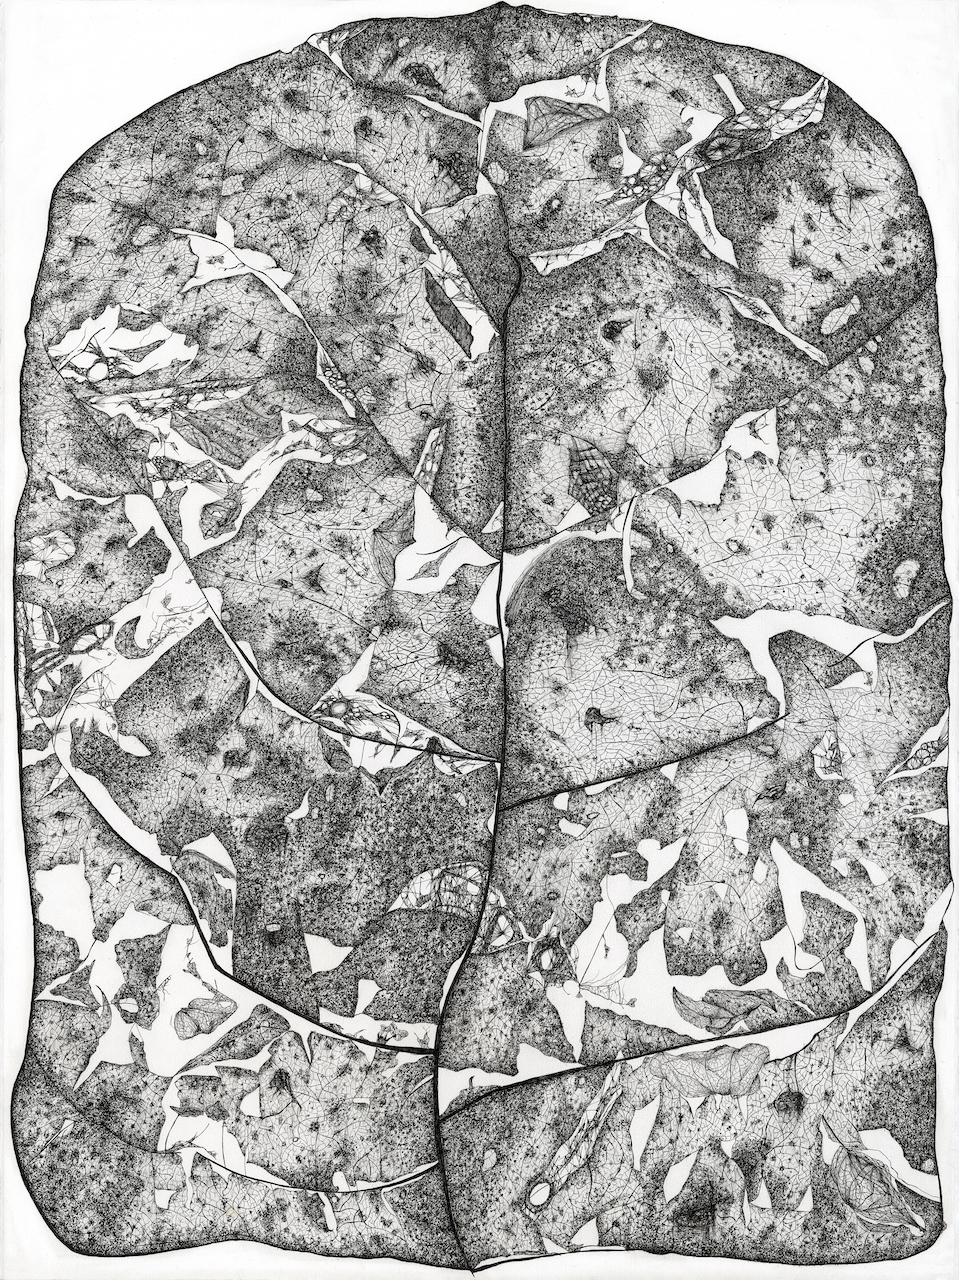 A rectangular organic shape, with leaf-like pattern in black and white